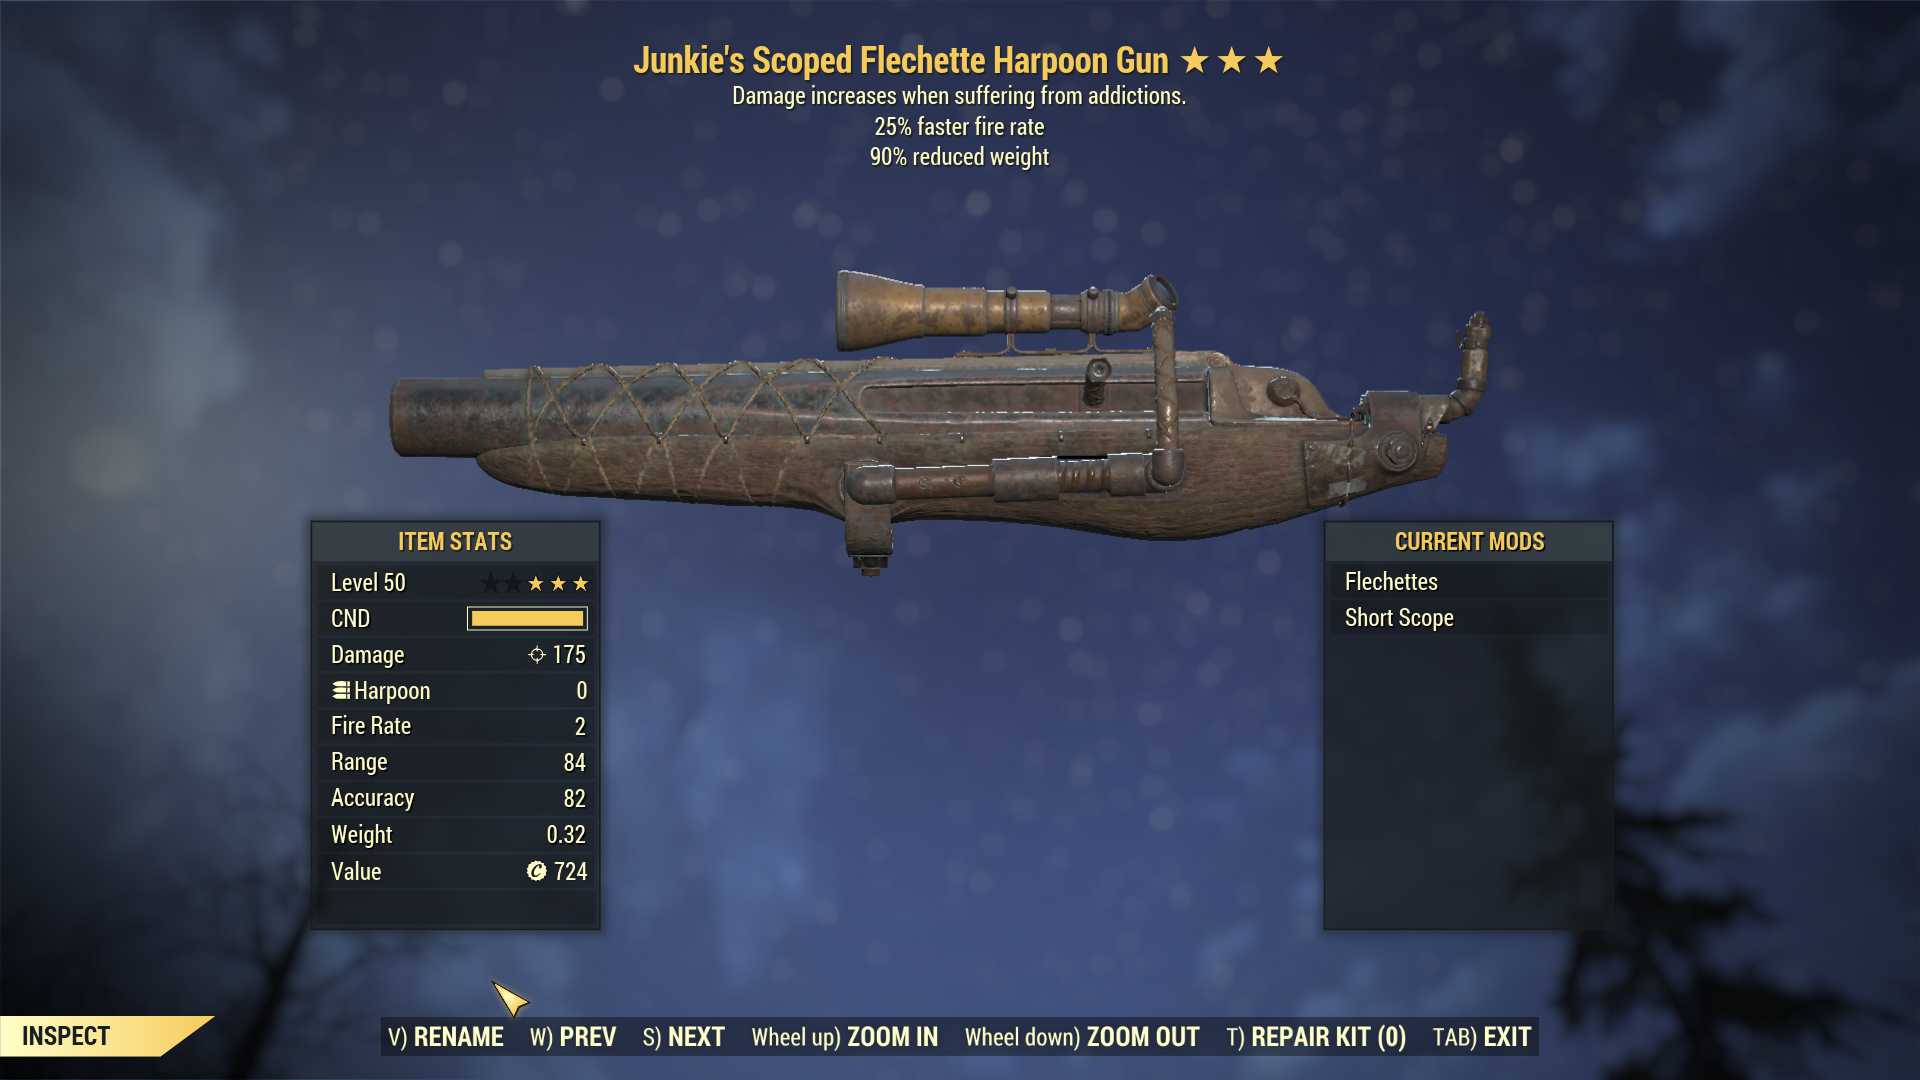 Junkie's Harpoon Gun (25% faster fire rate, 90% reduced weight)